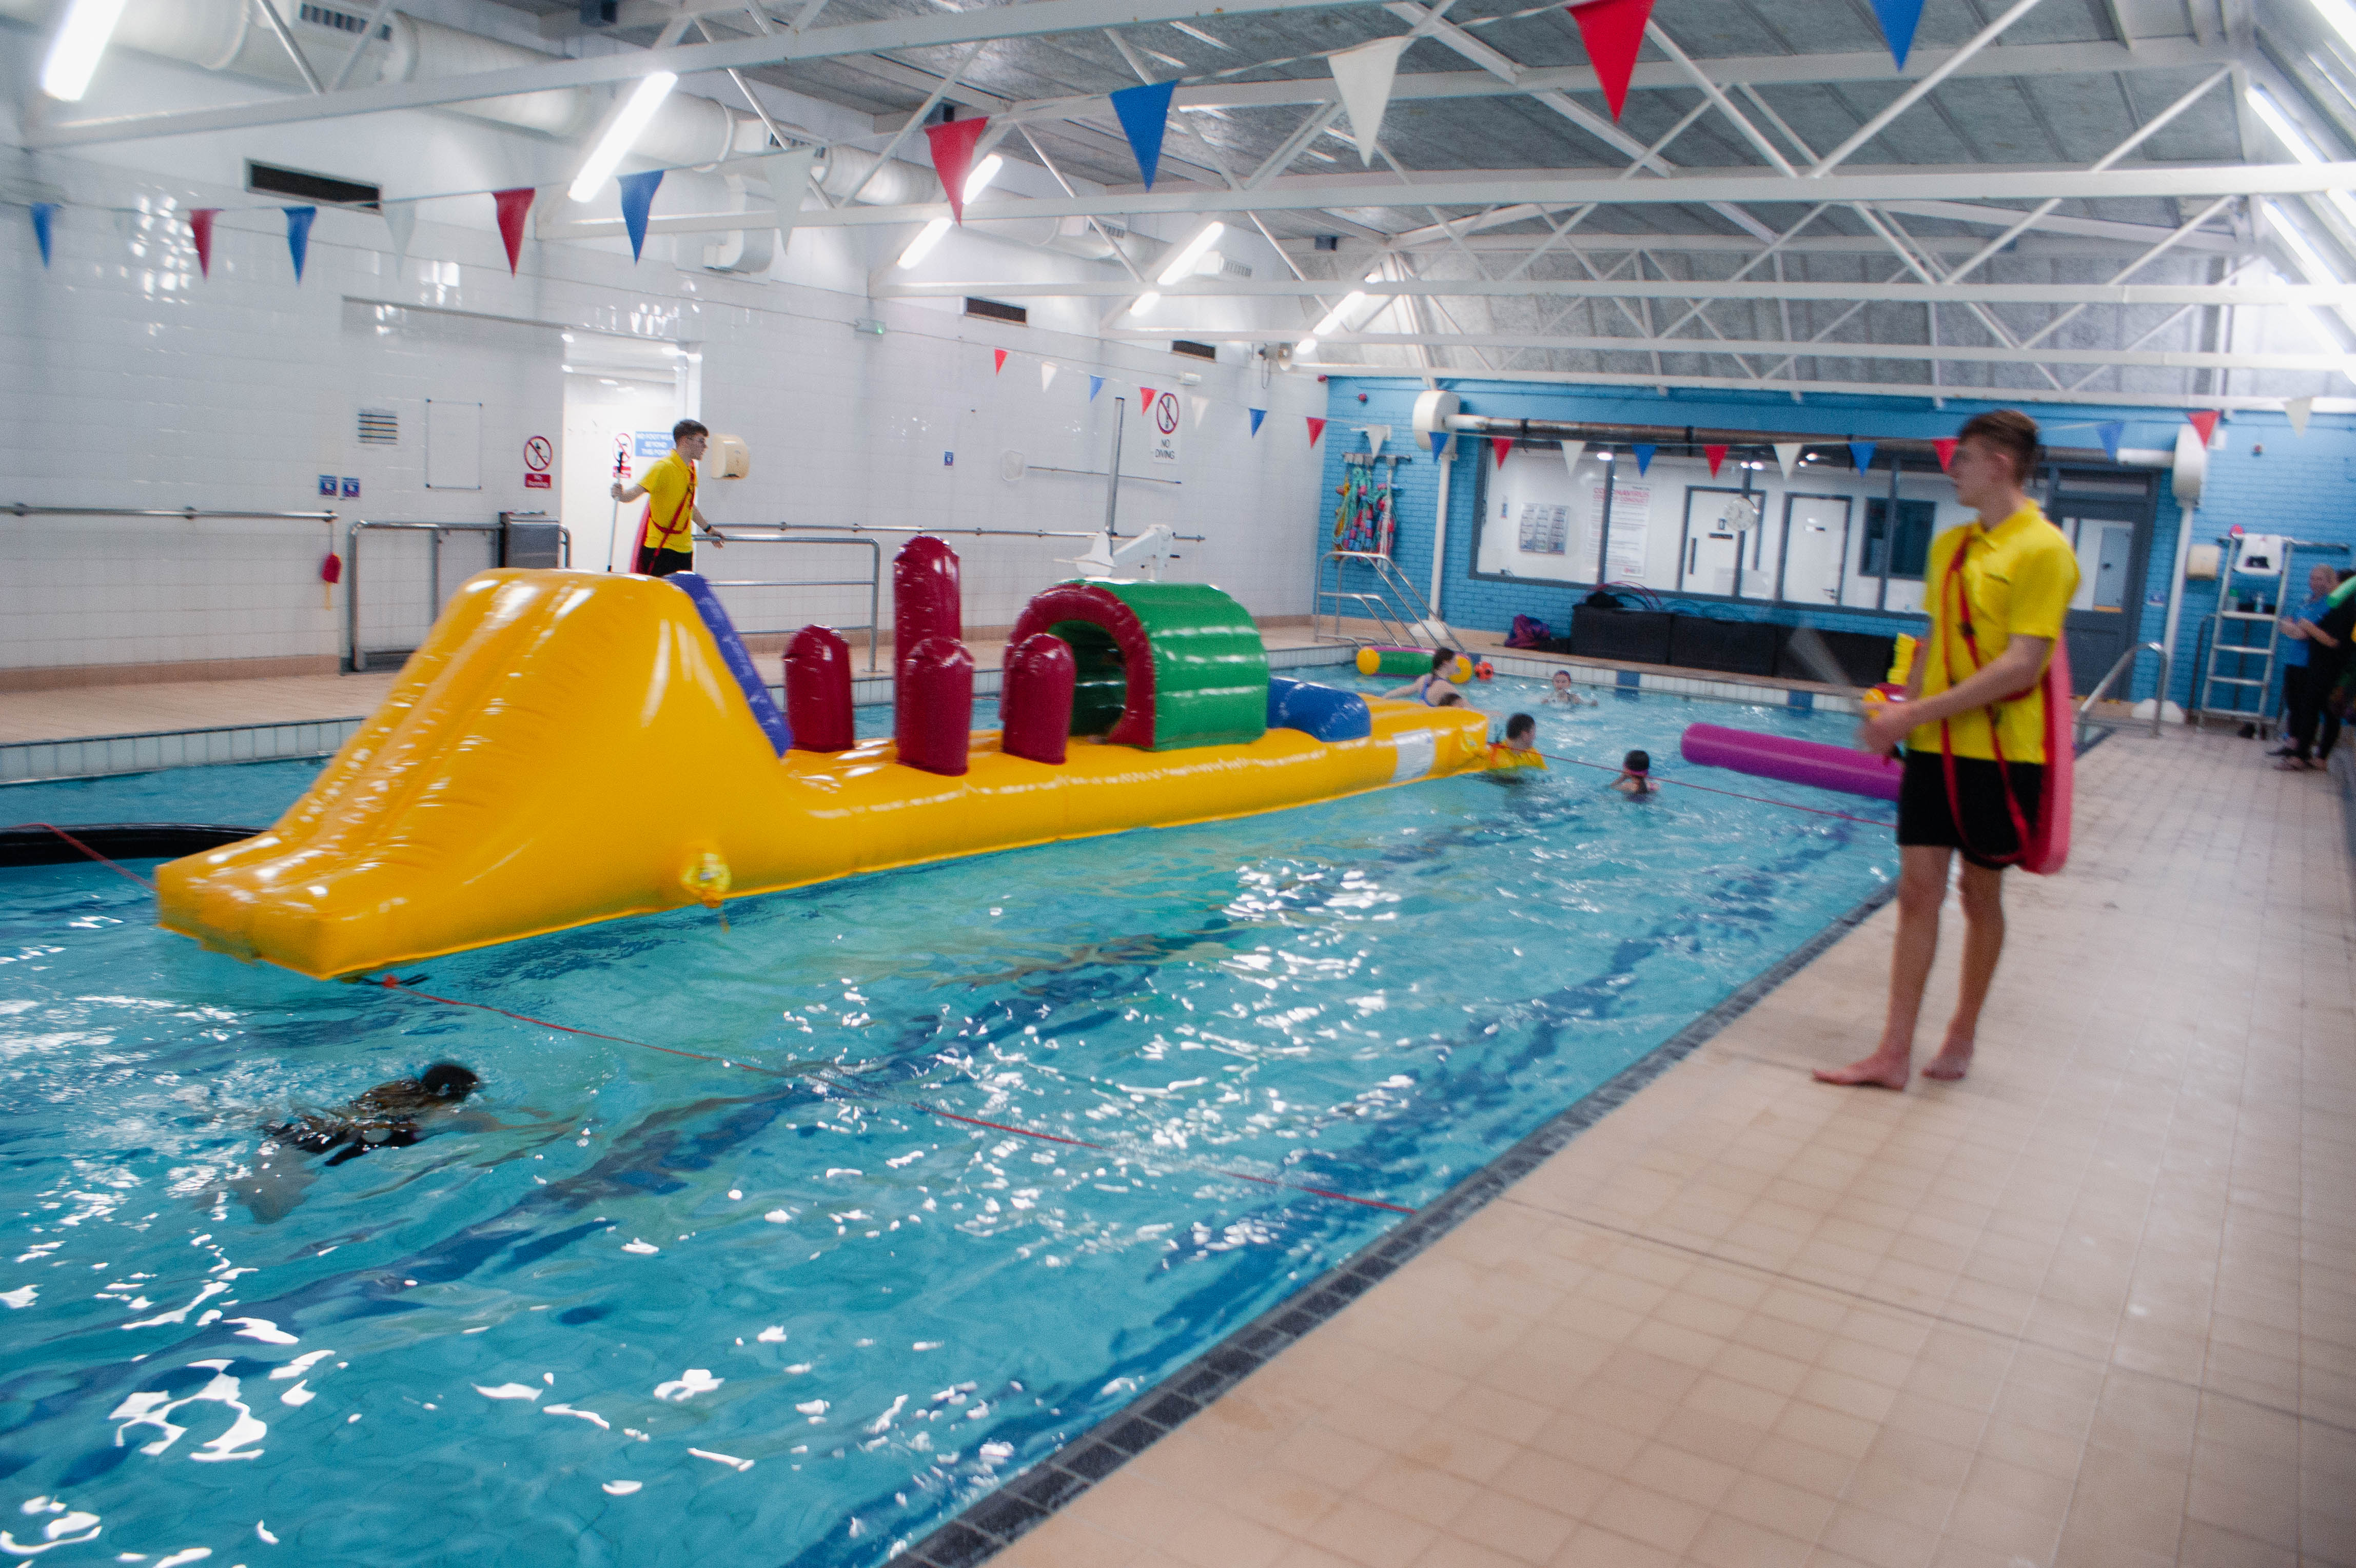 Indoor swimming pool with inflatable assault course.